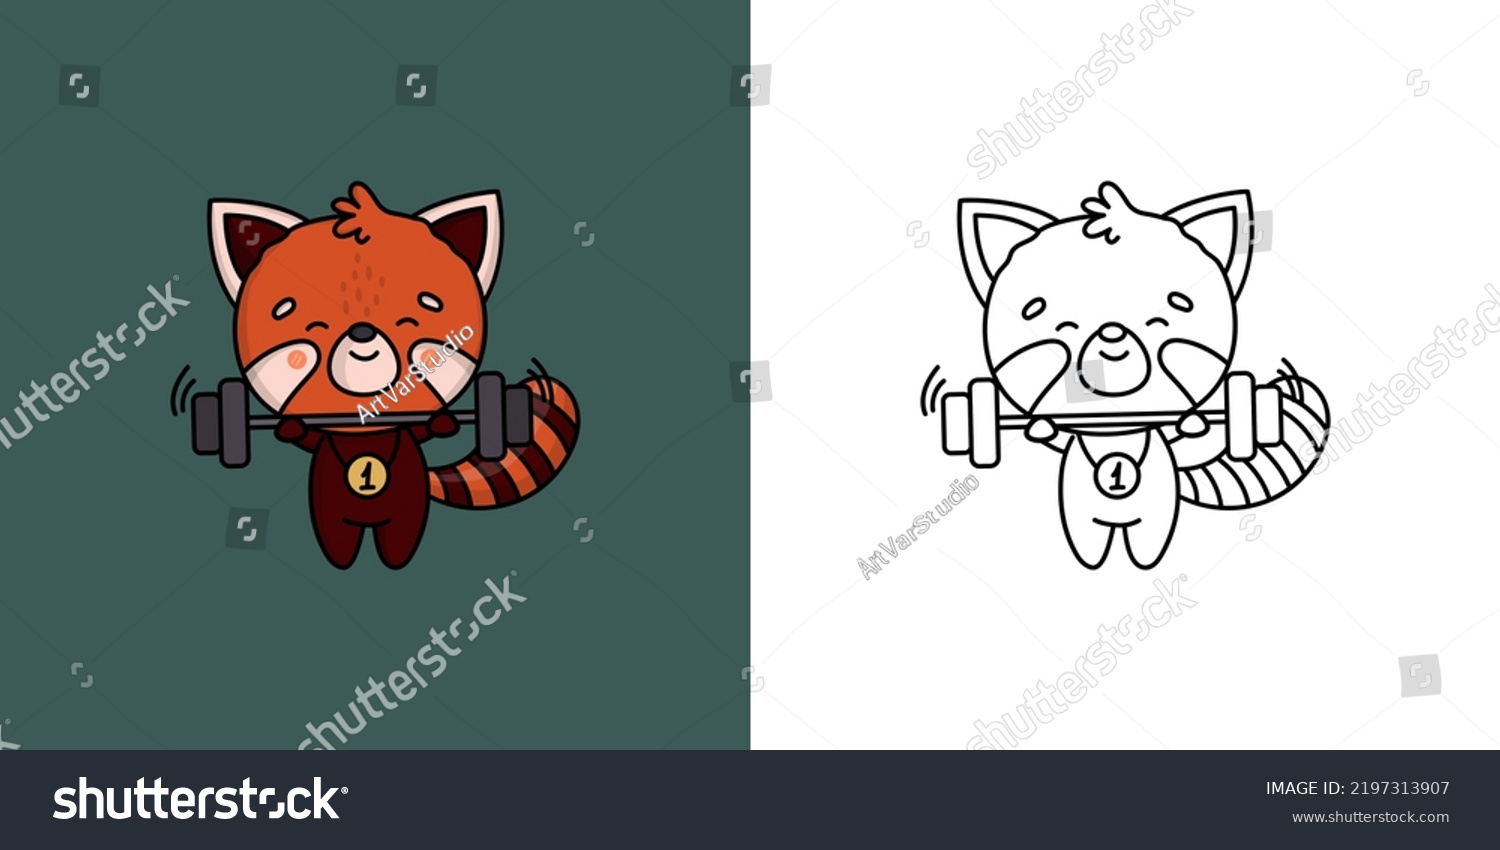 SVG of Set Clipart Red Panda Athlete Coloring Page and Colored Illustration. Kawaii Animal Sportsman. Vector Illustration of a Kawaii Animal for Coloring Pages, Prints for Clothes, Stickers, Baby Shower.
 svg